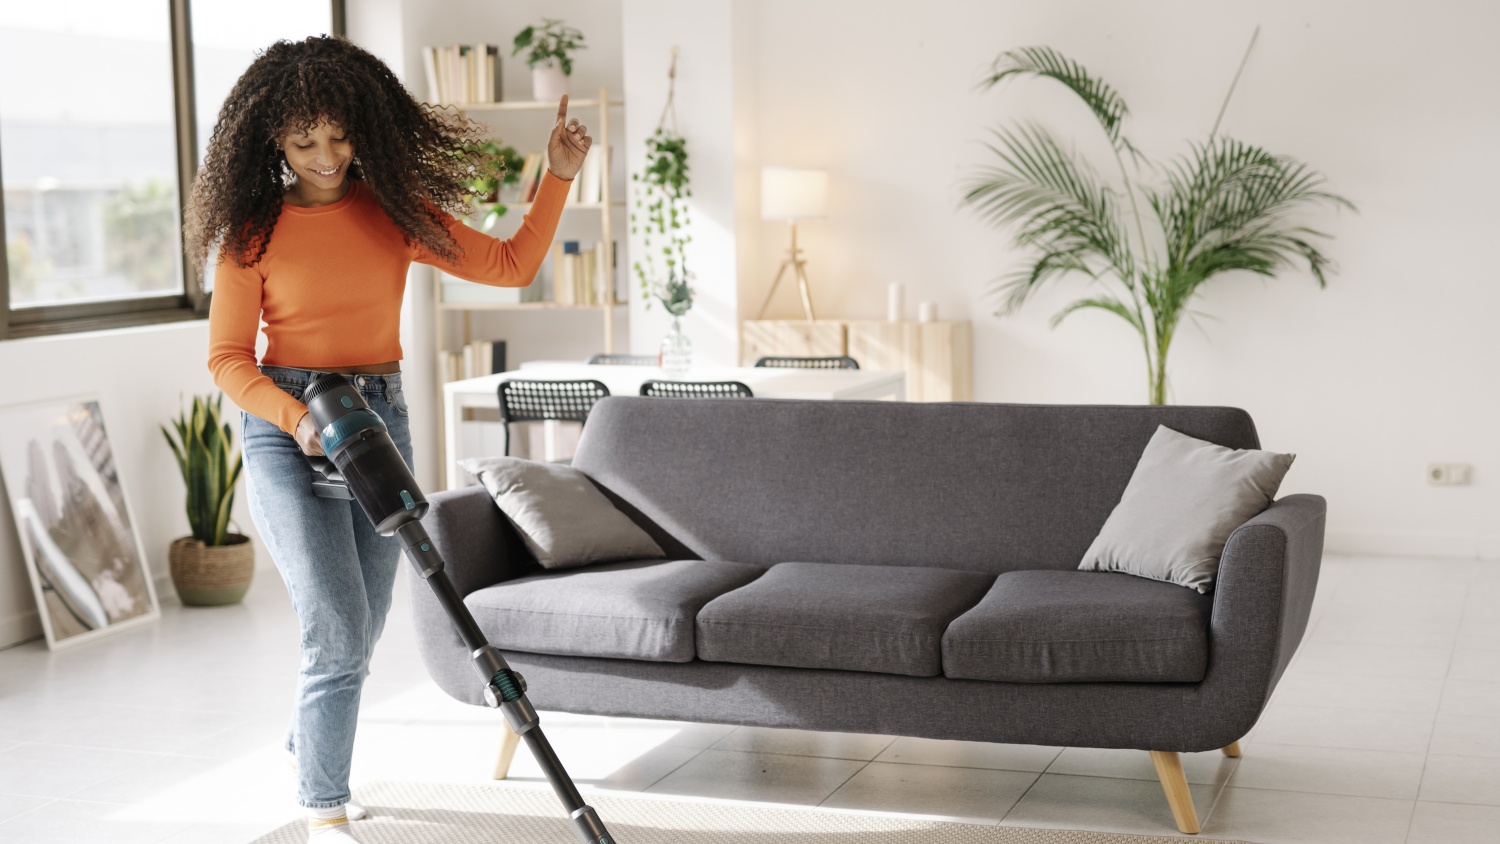 Get Your House Squeaky Clean With These Products For Spring Cleaning